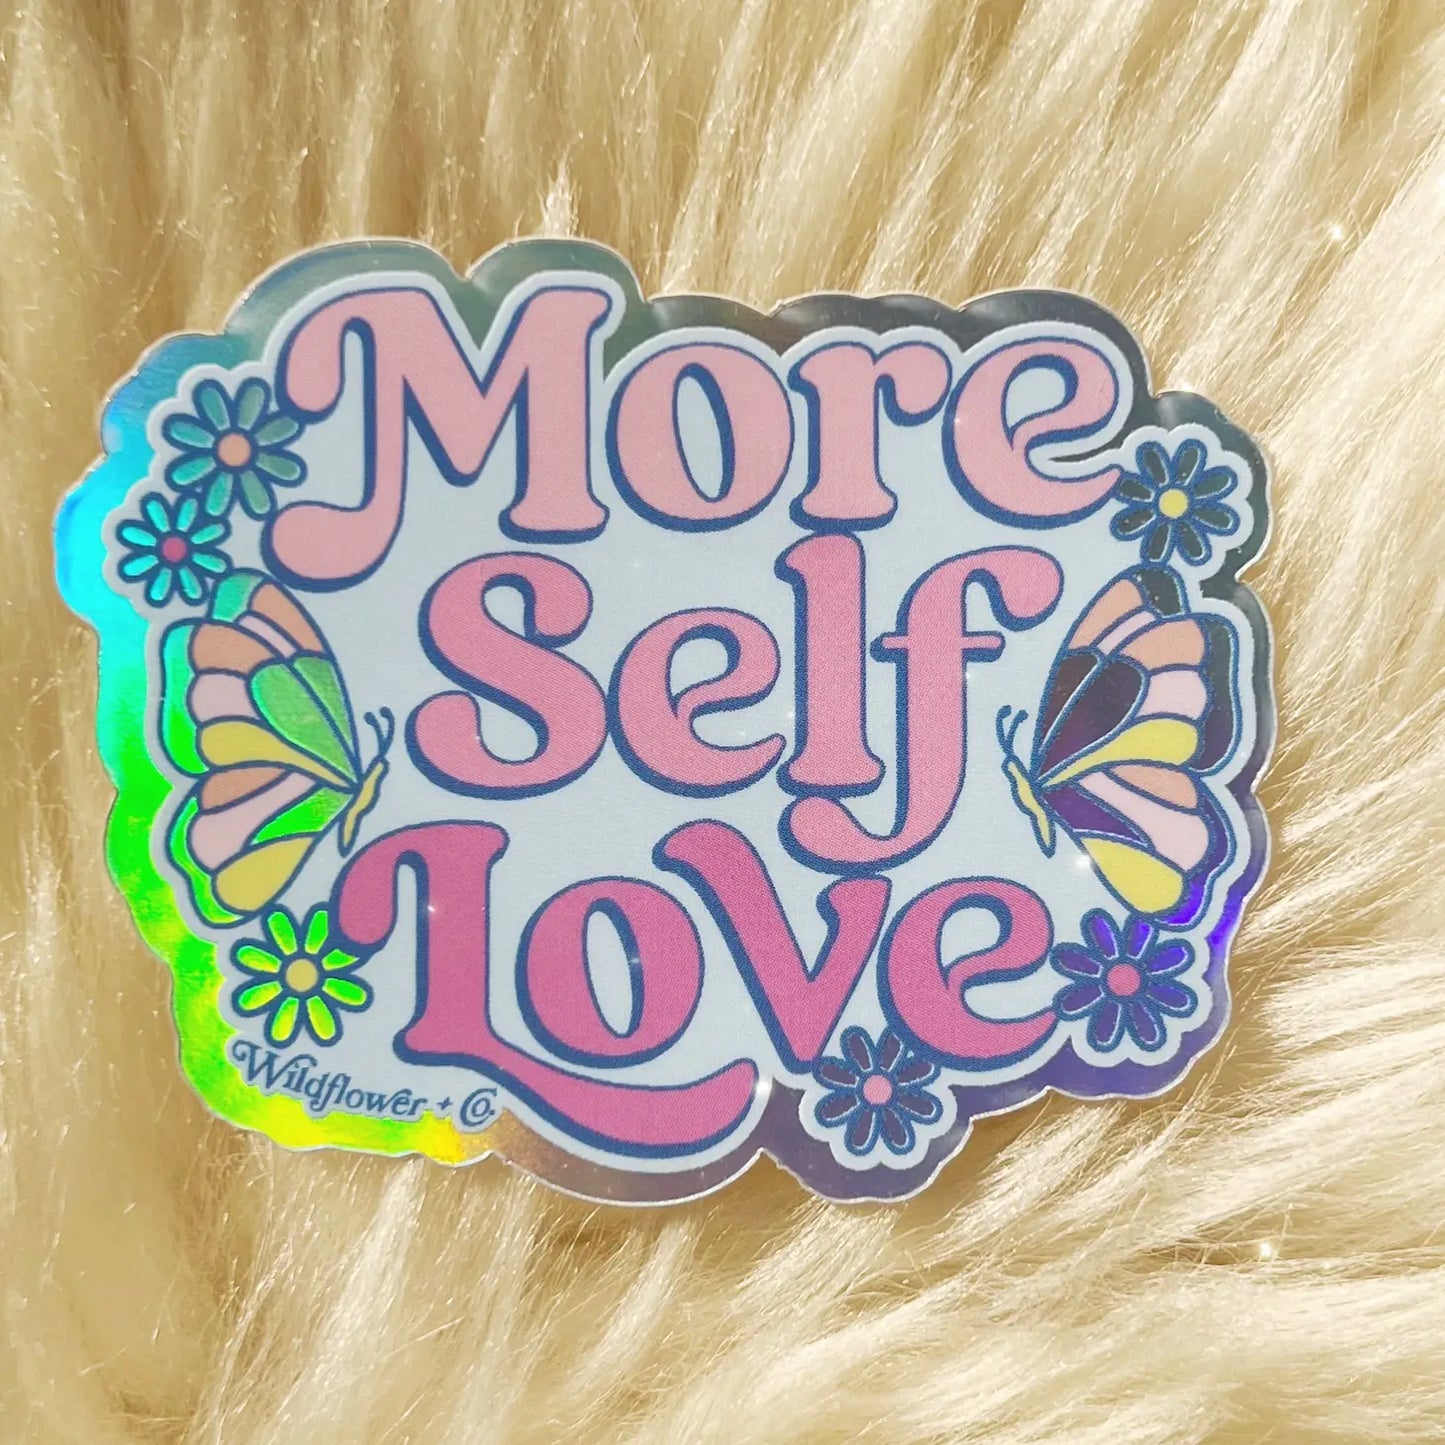 More Self Love Sticker - Moon Room Shop and Wellness